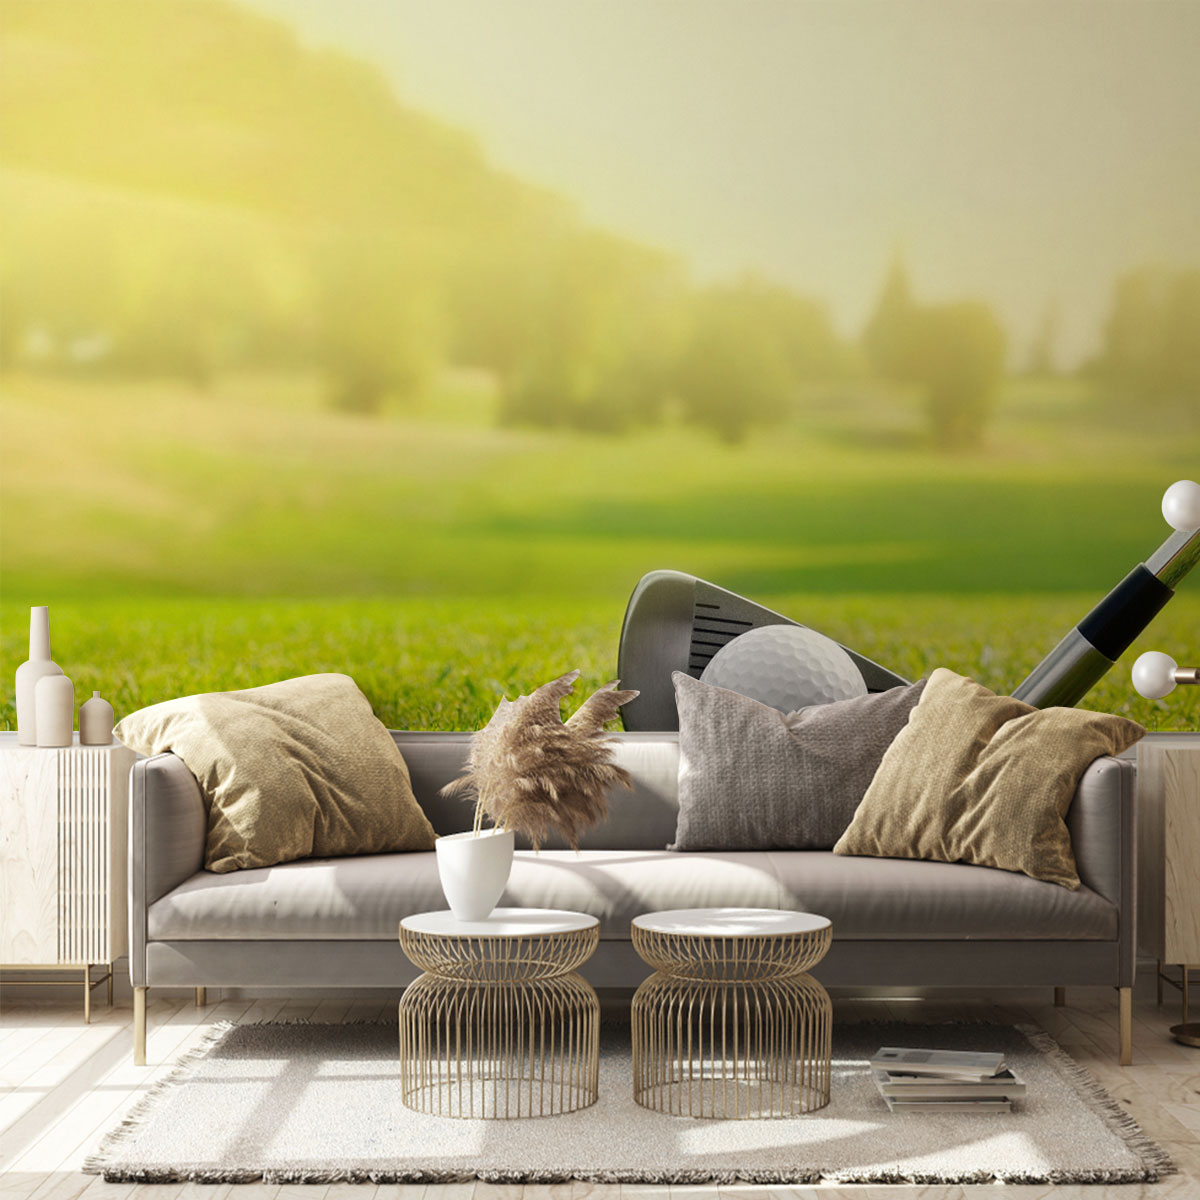 Golf Tools On Grass Wall Mural_2_1